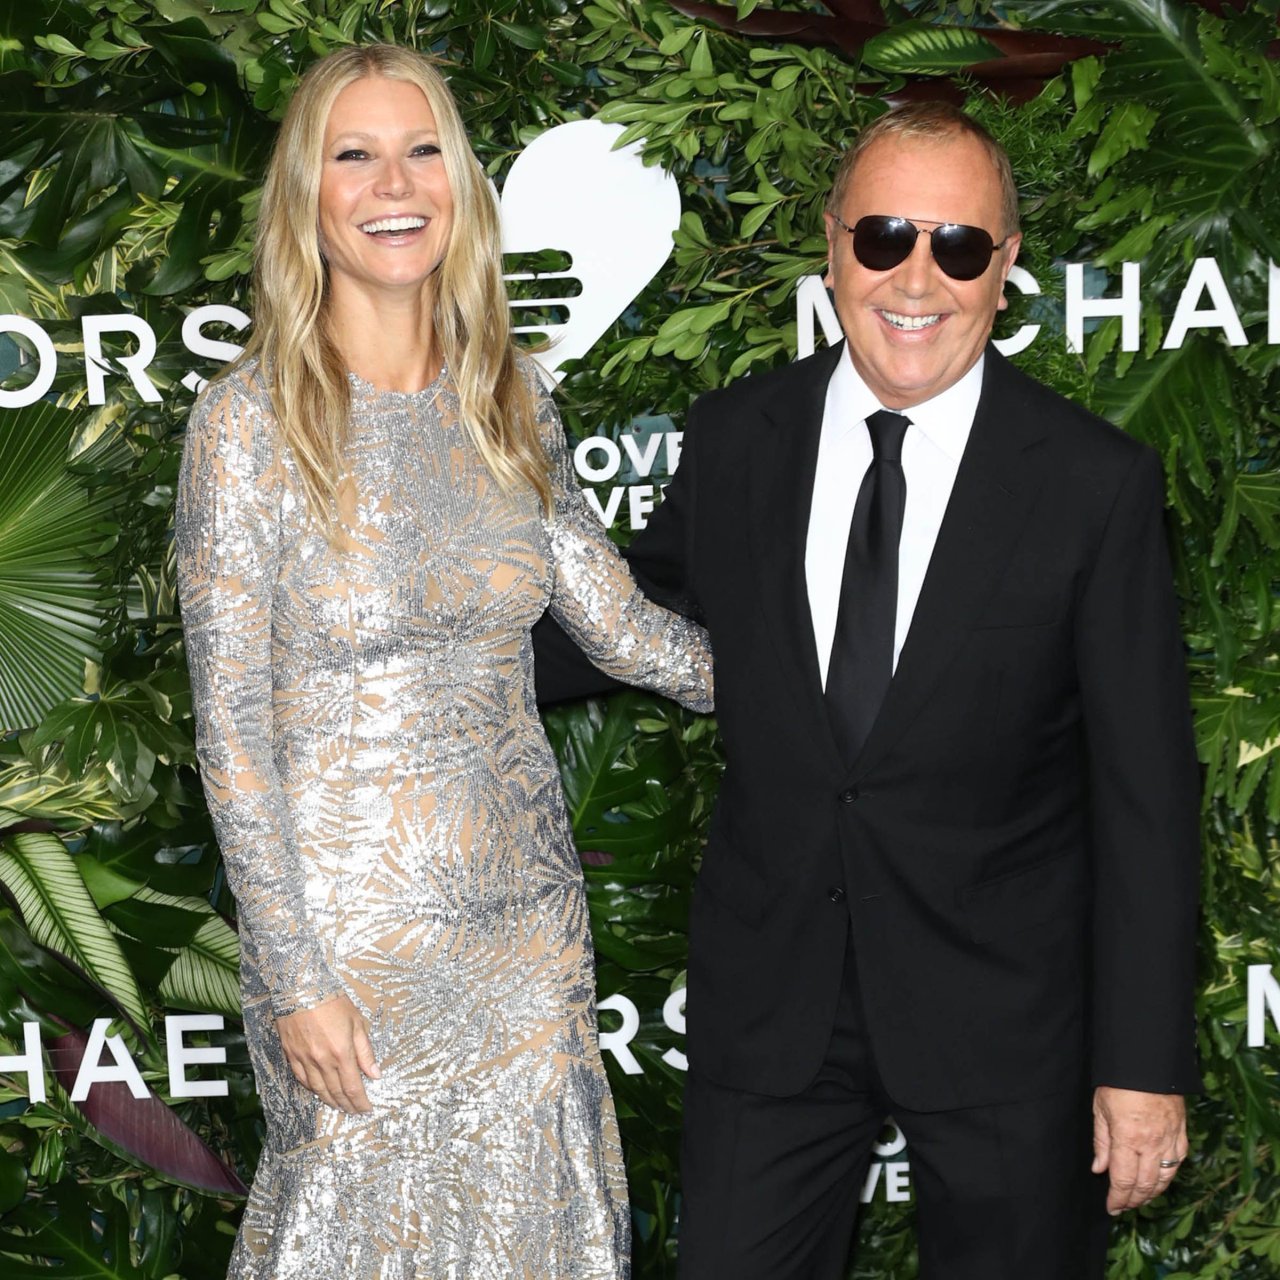 Fabulous Blonde Actress Gwyneth Paltrow Turns Up in a See-Through Dress